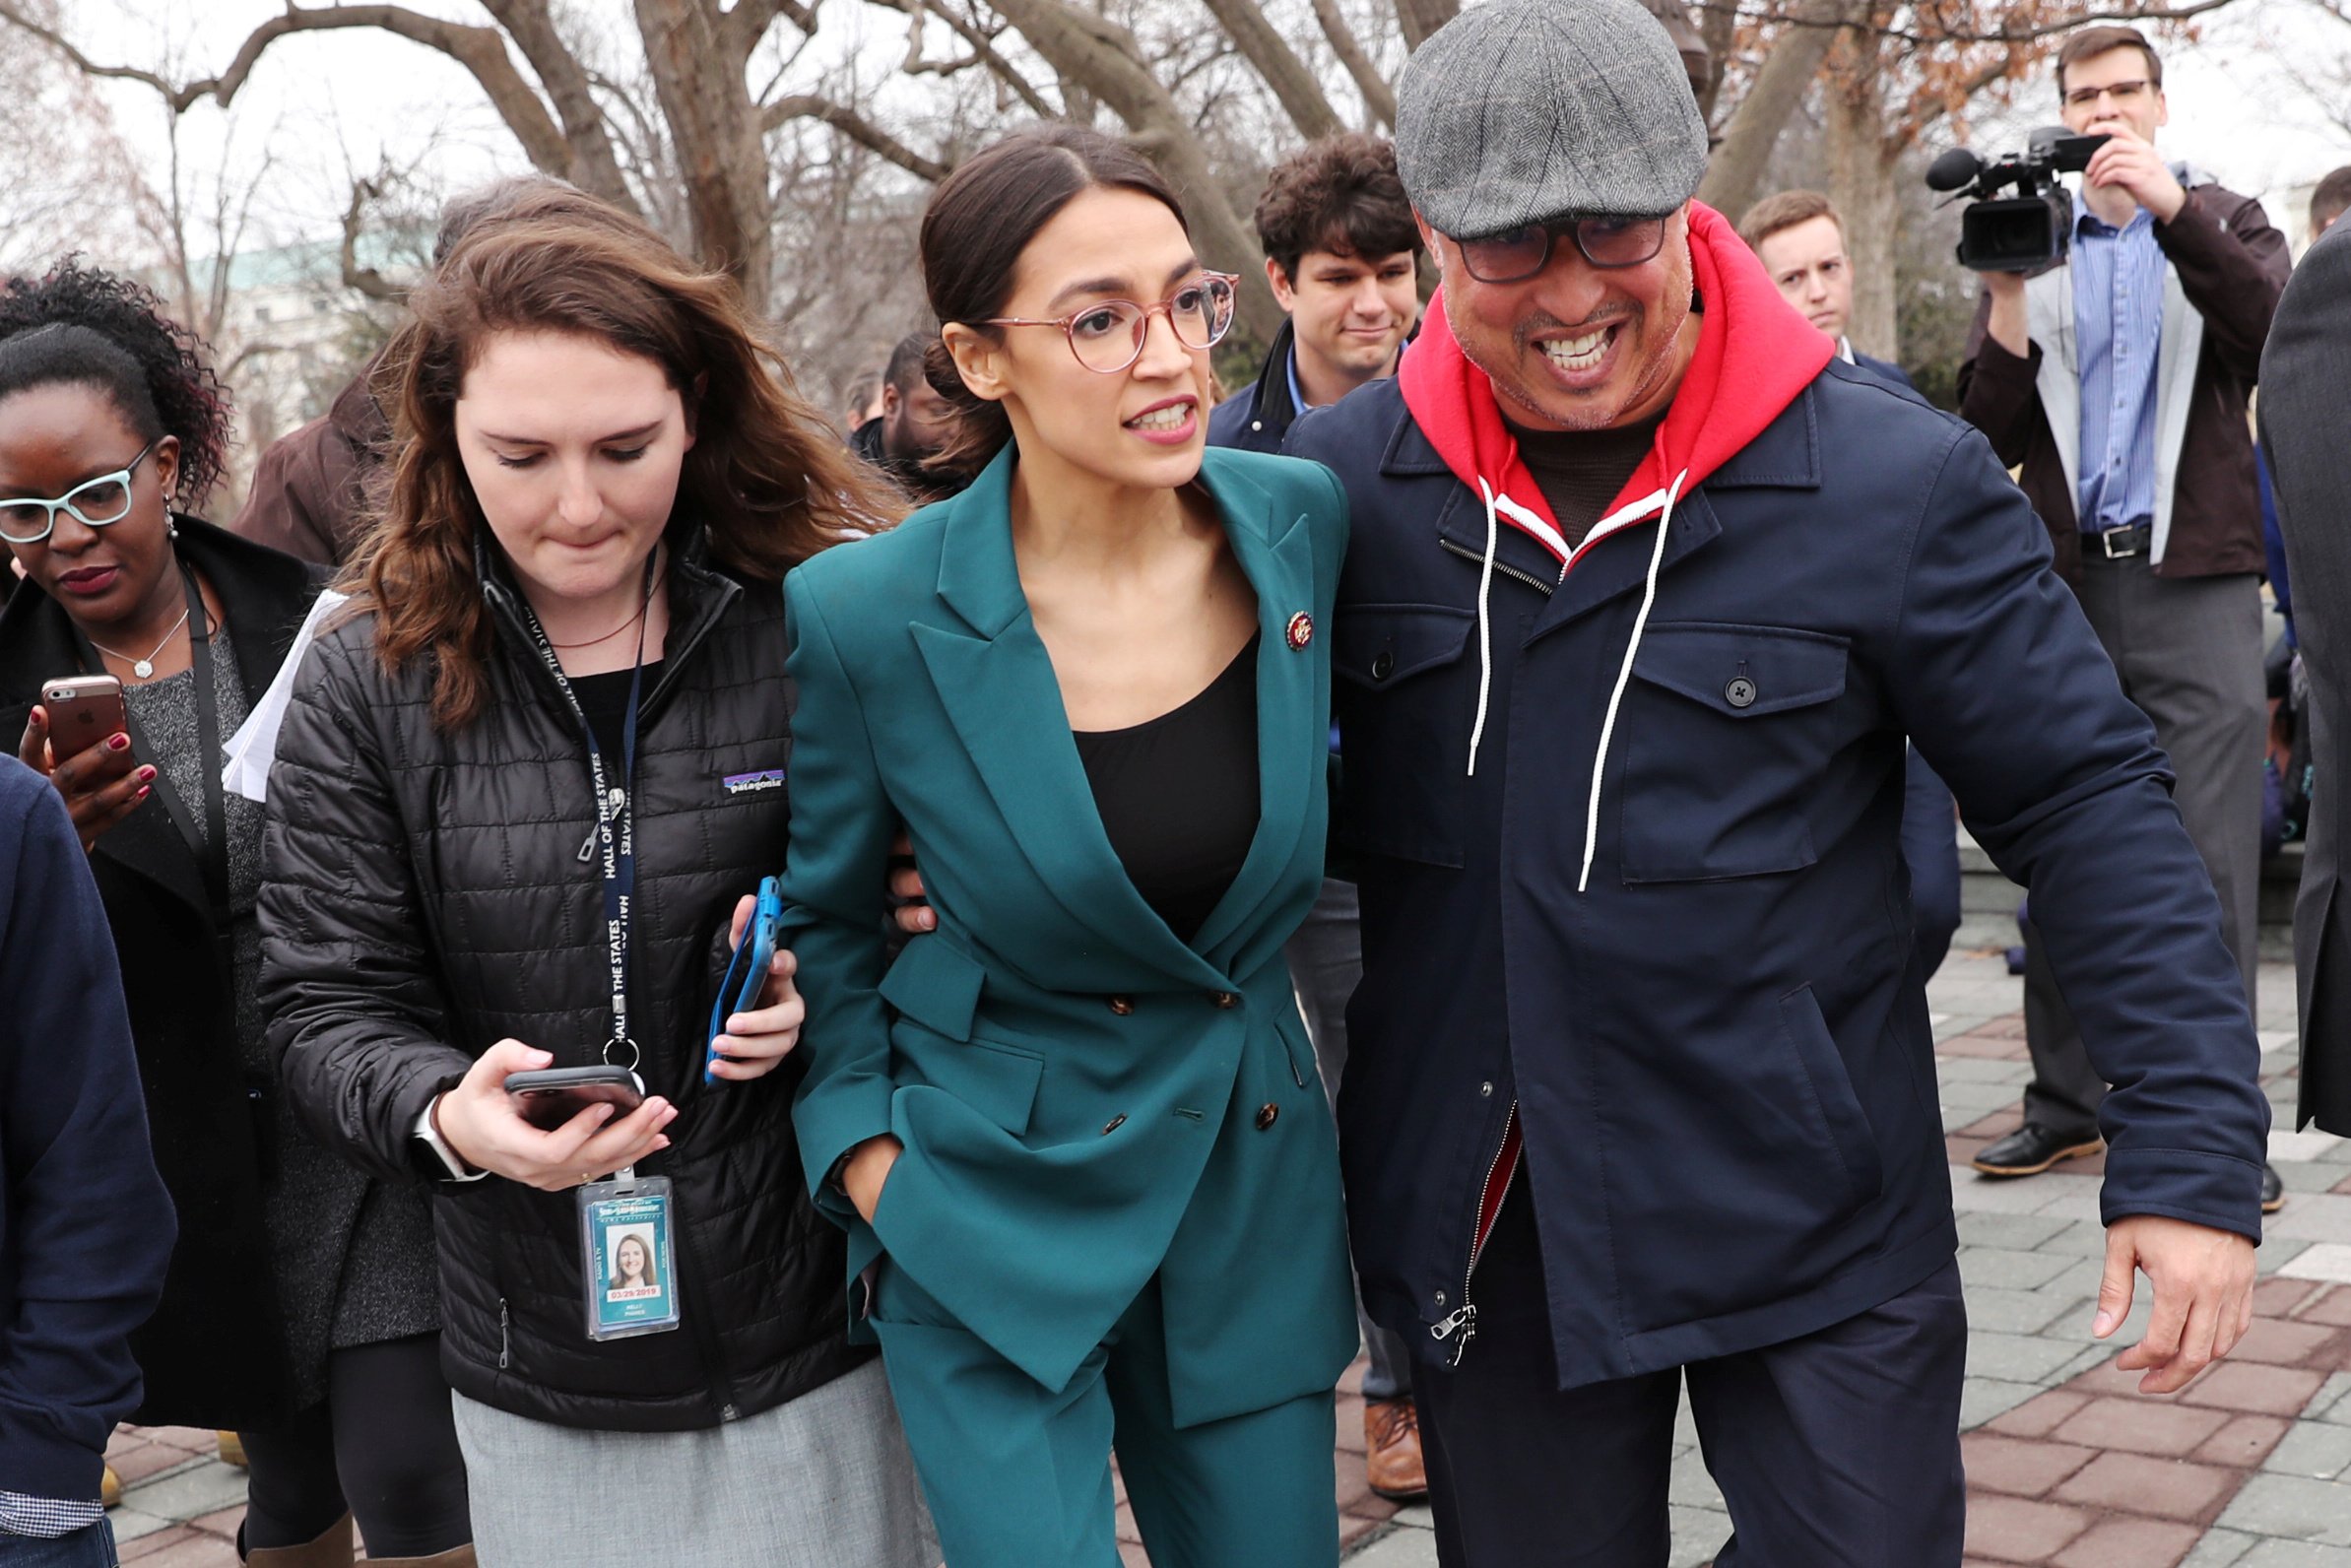 U.S. Representative Ocasio-Cortez moves through a group of reporters after a news conference for the proposed "Green New Deal" at the U.S. Capitol in Washington